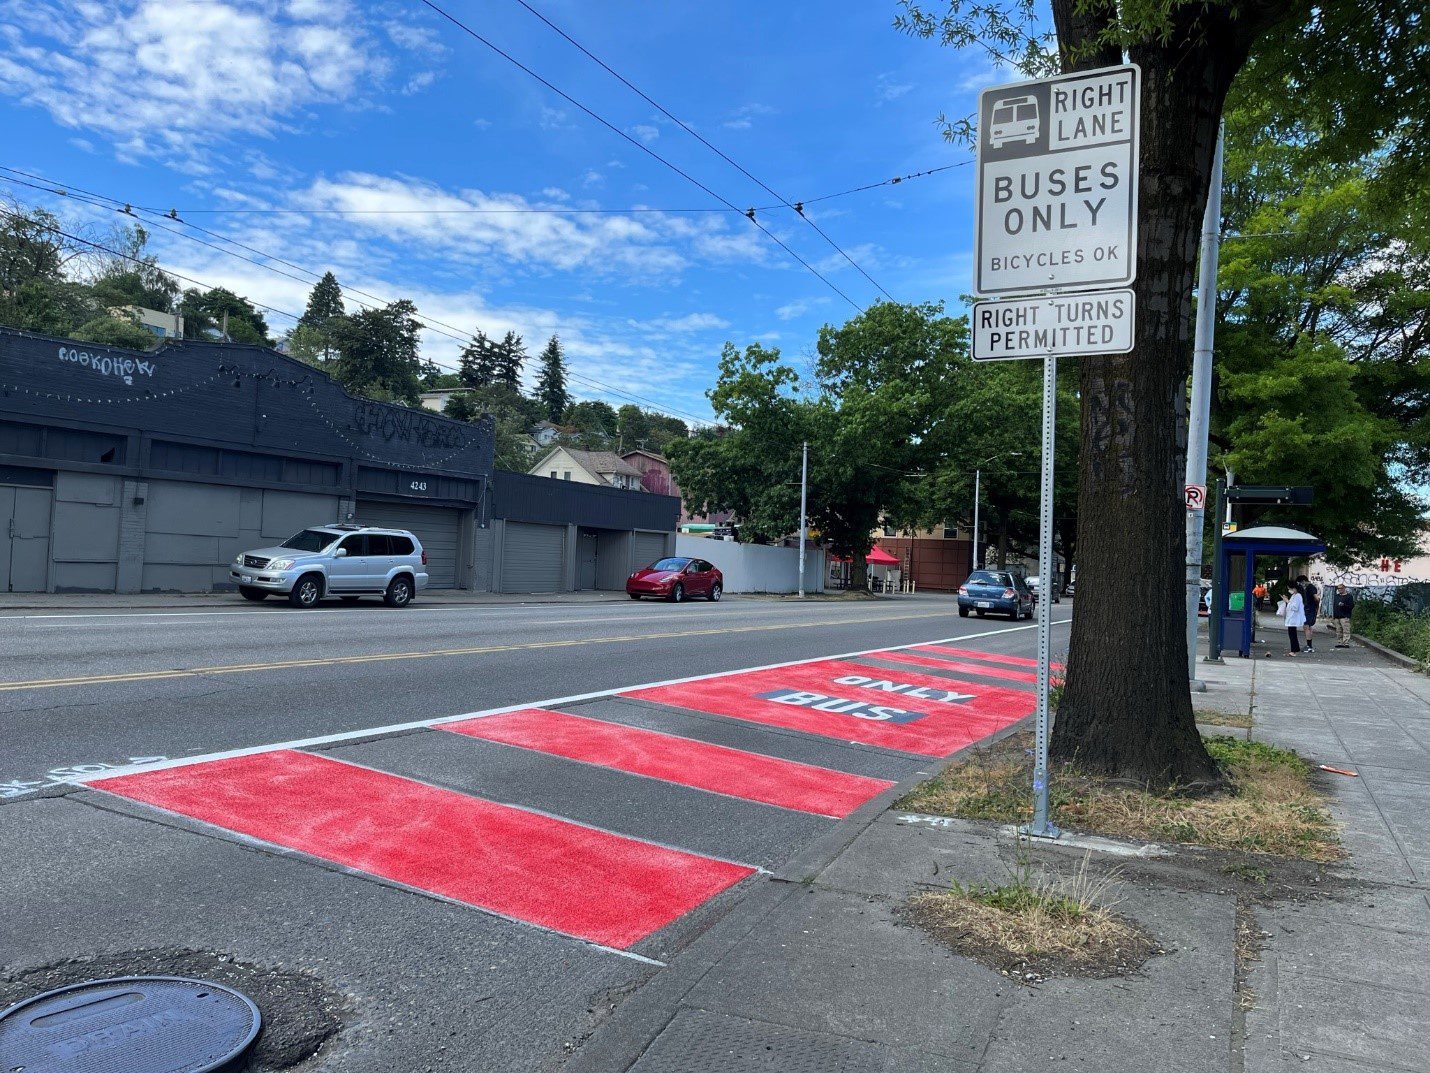 A red painted lane along a street on a sunny day. The lane includes the words "Bus Only". A sign also states that the right lane is for buses only, bicycles are OK, and right turns are permitted.